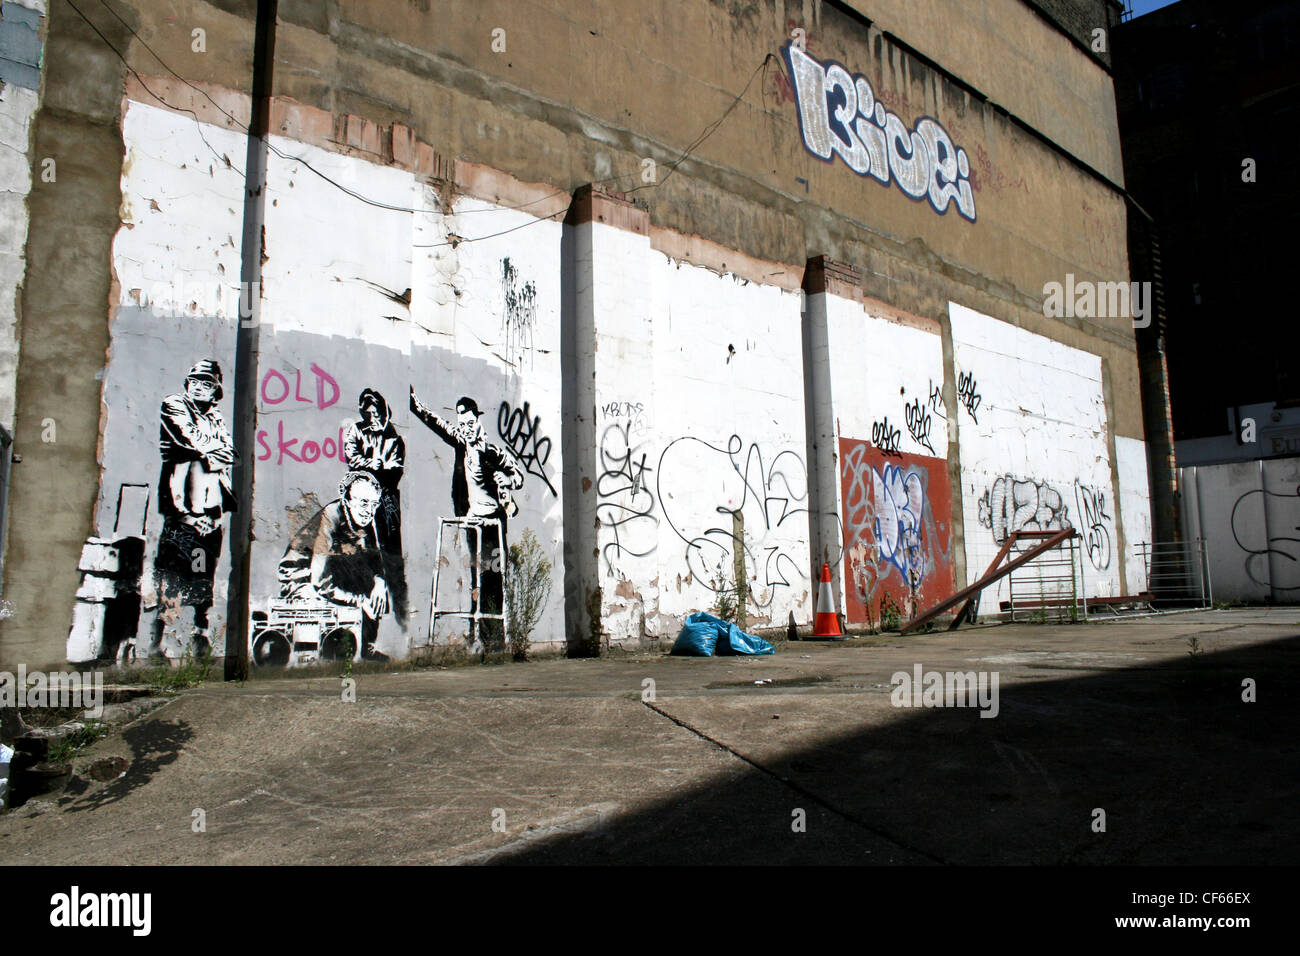 Old Skool graffiti by the artist known as Banksy Stock Photo - Alamy